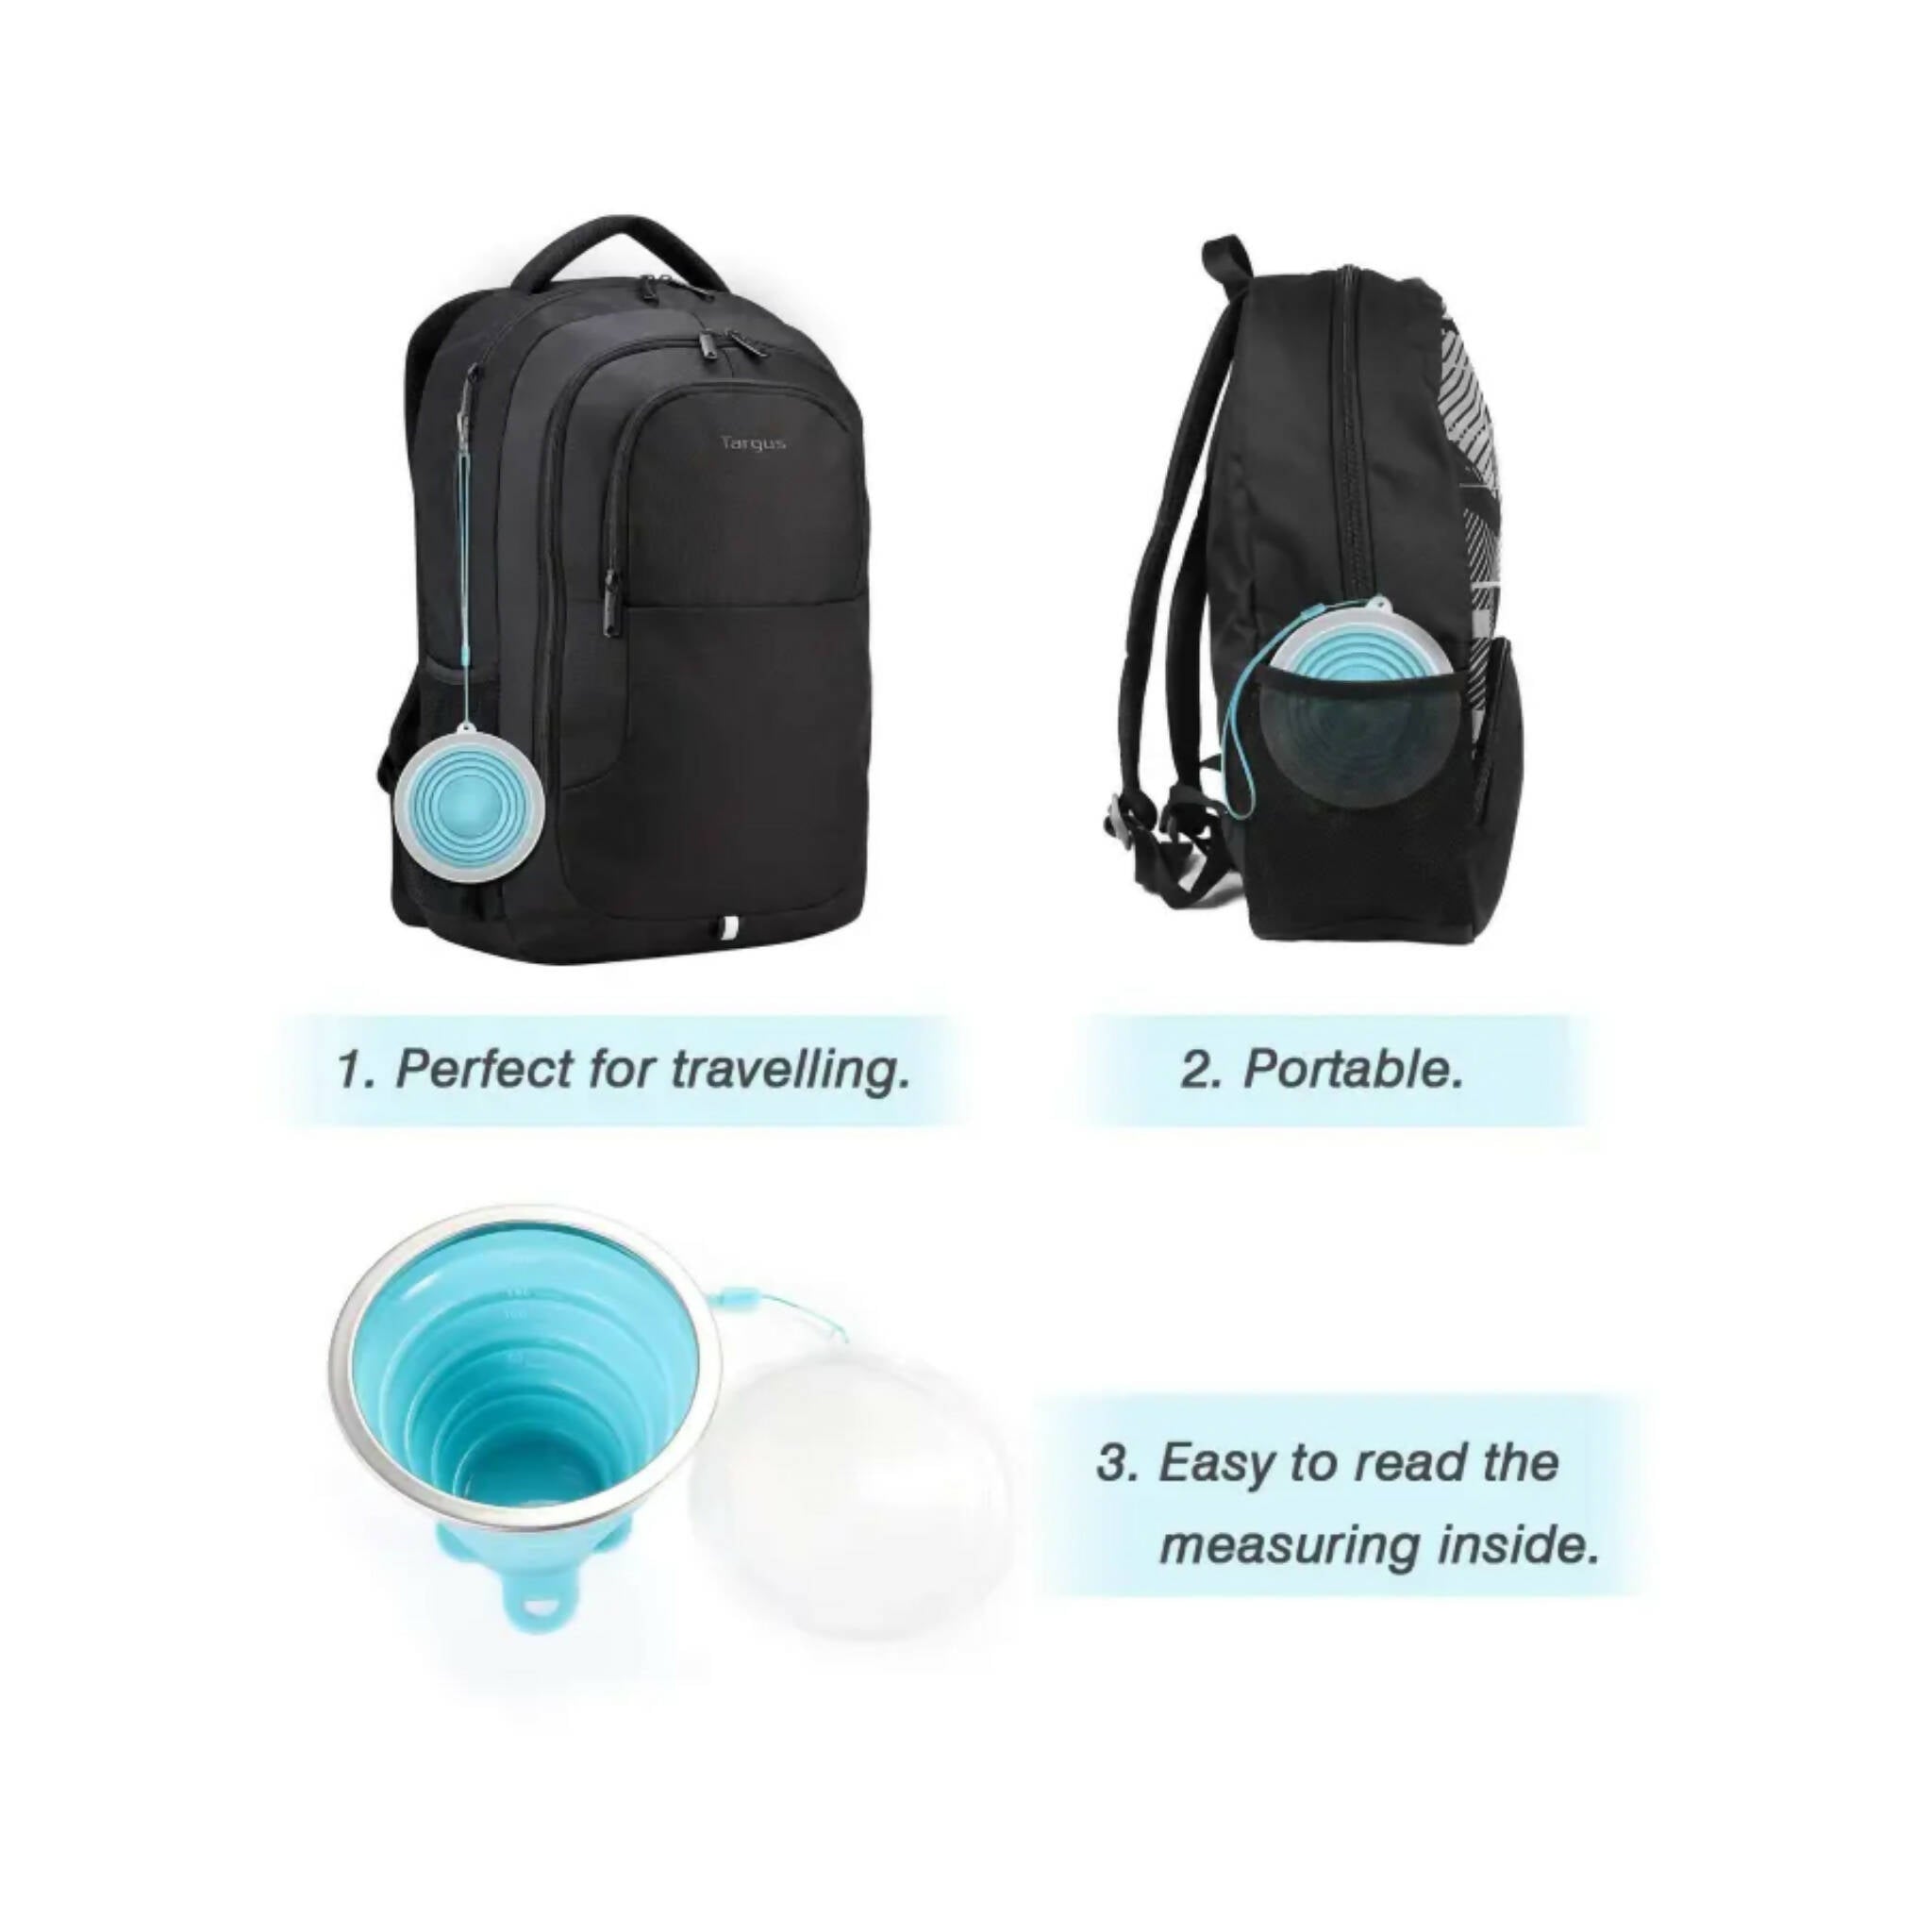 Silicone Cup, Compact and Convenient, for On-the-Go Hydration